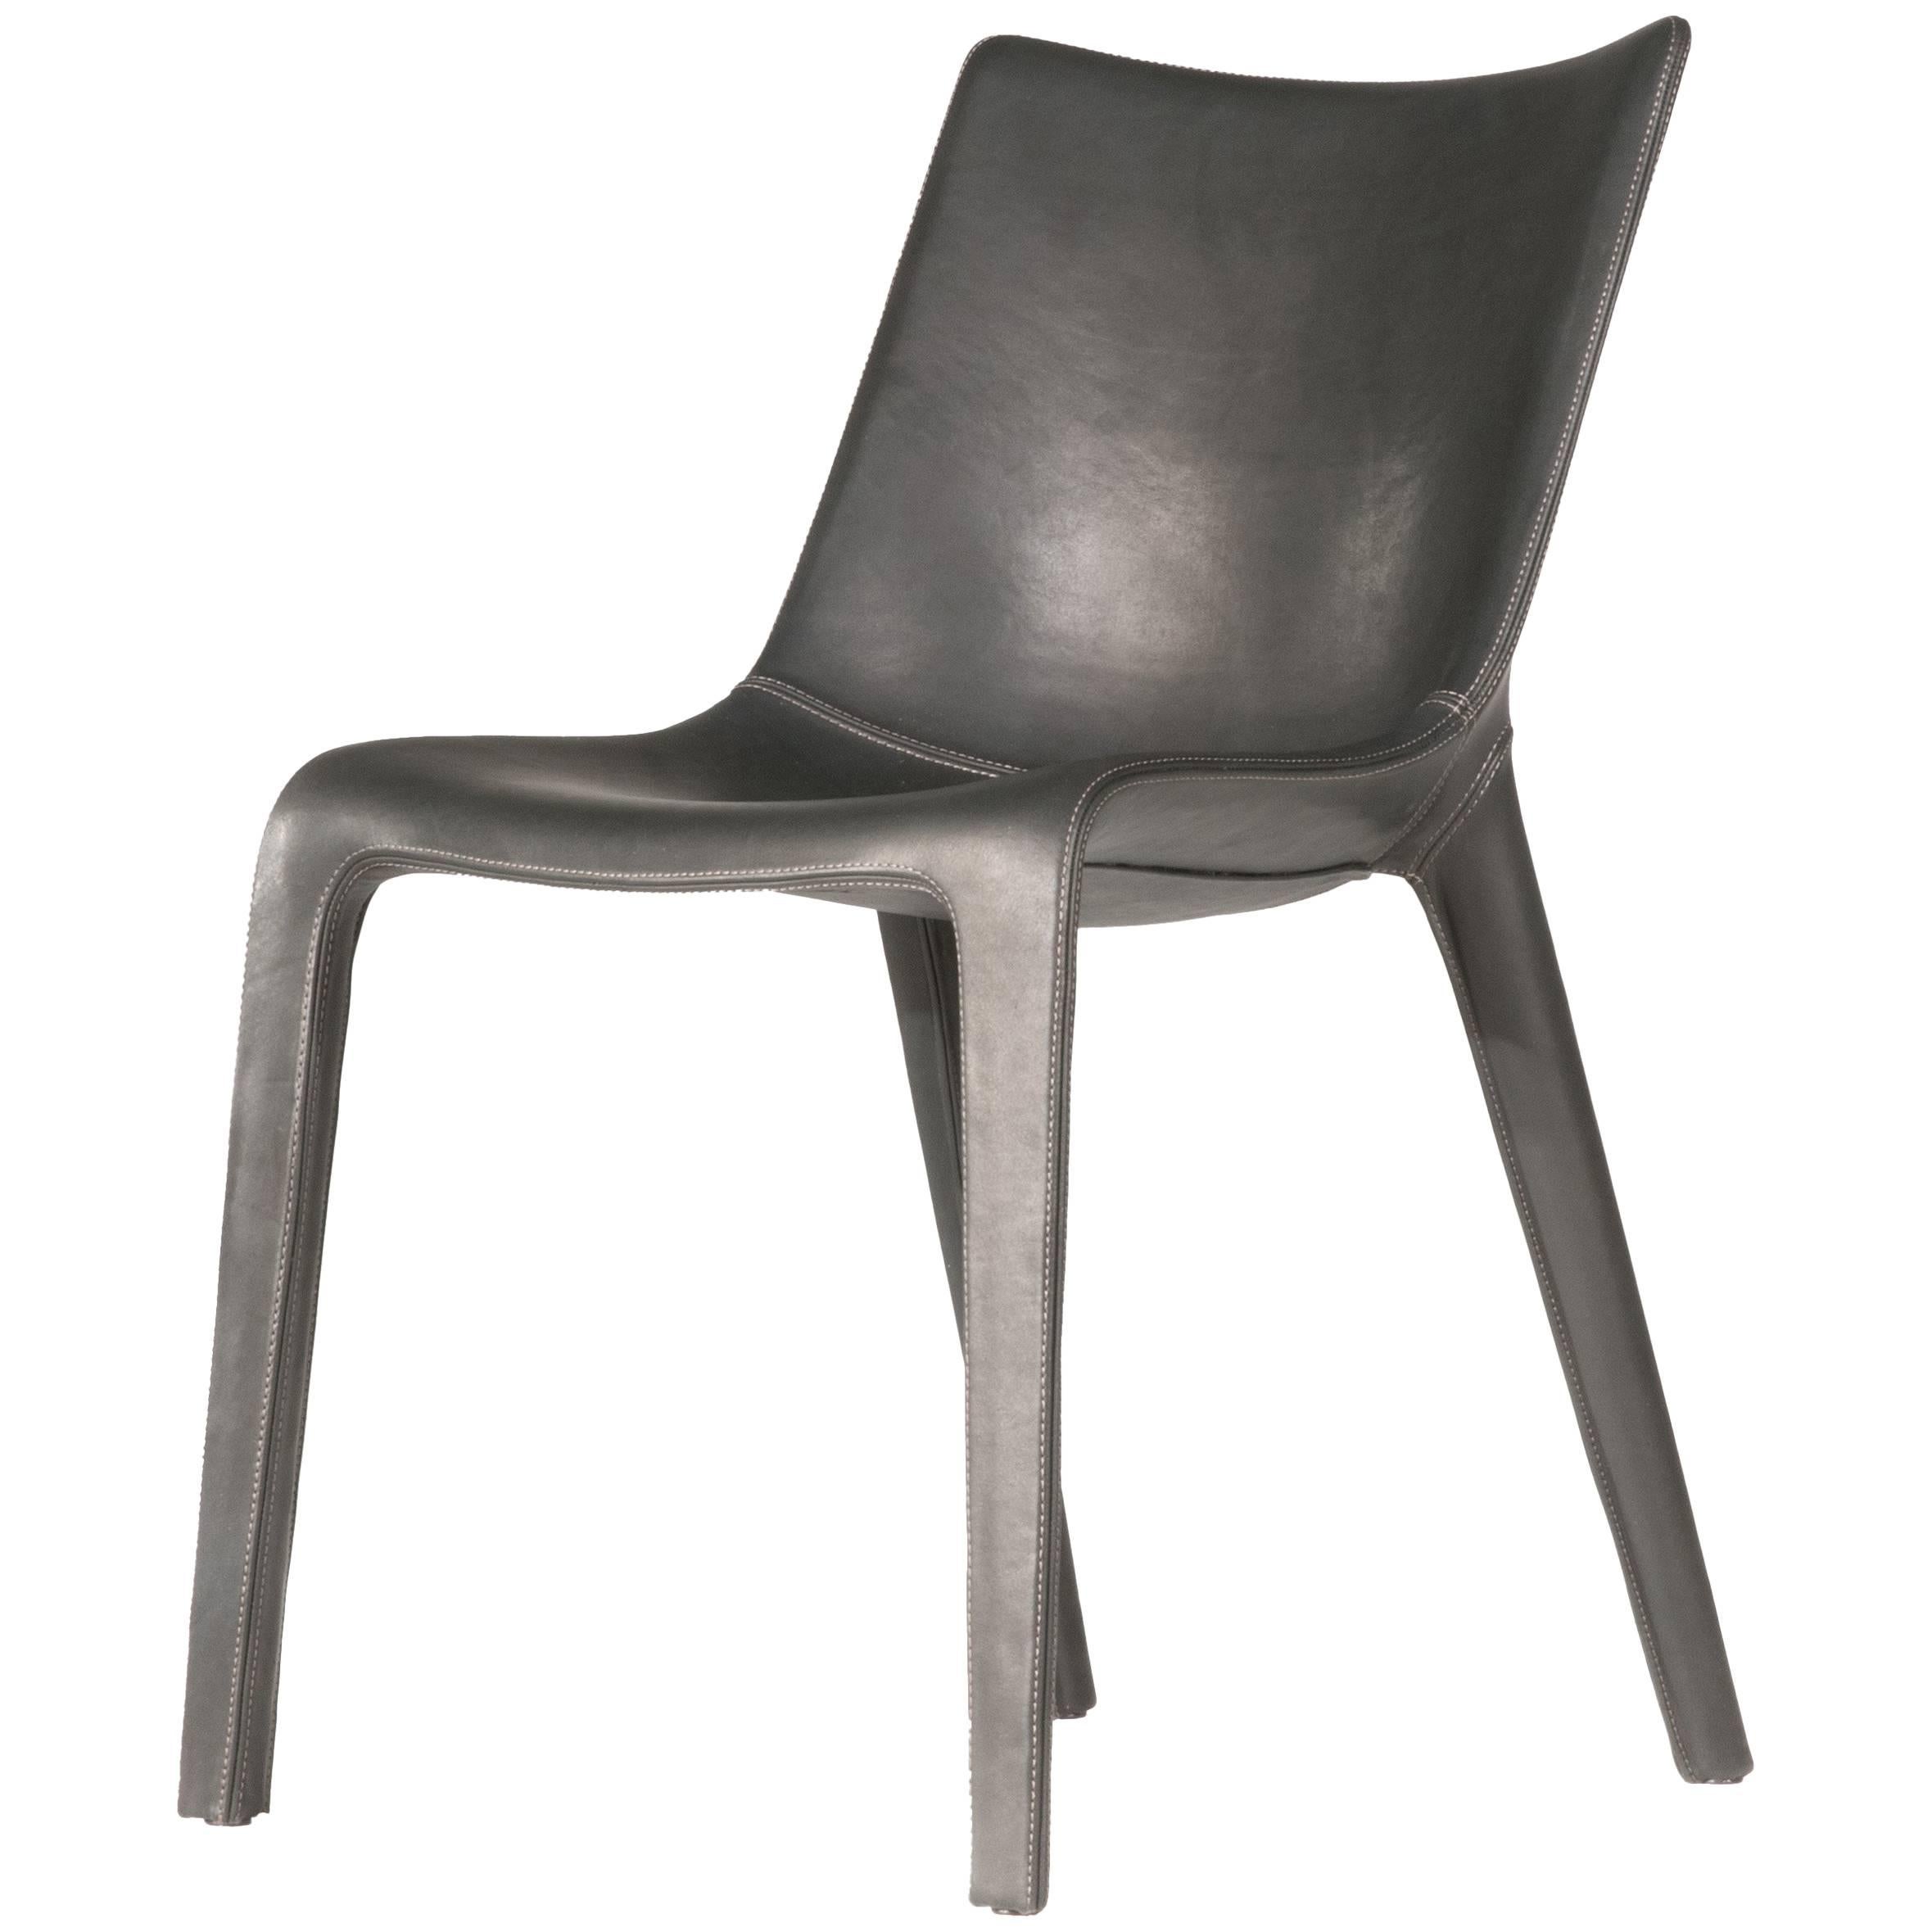 Lou Eat Chair in Black Leather by Philippe Starck & D. Sugasawa for Driade